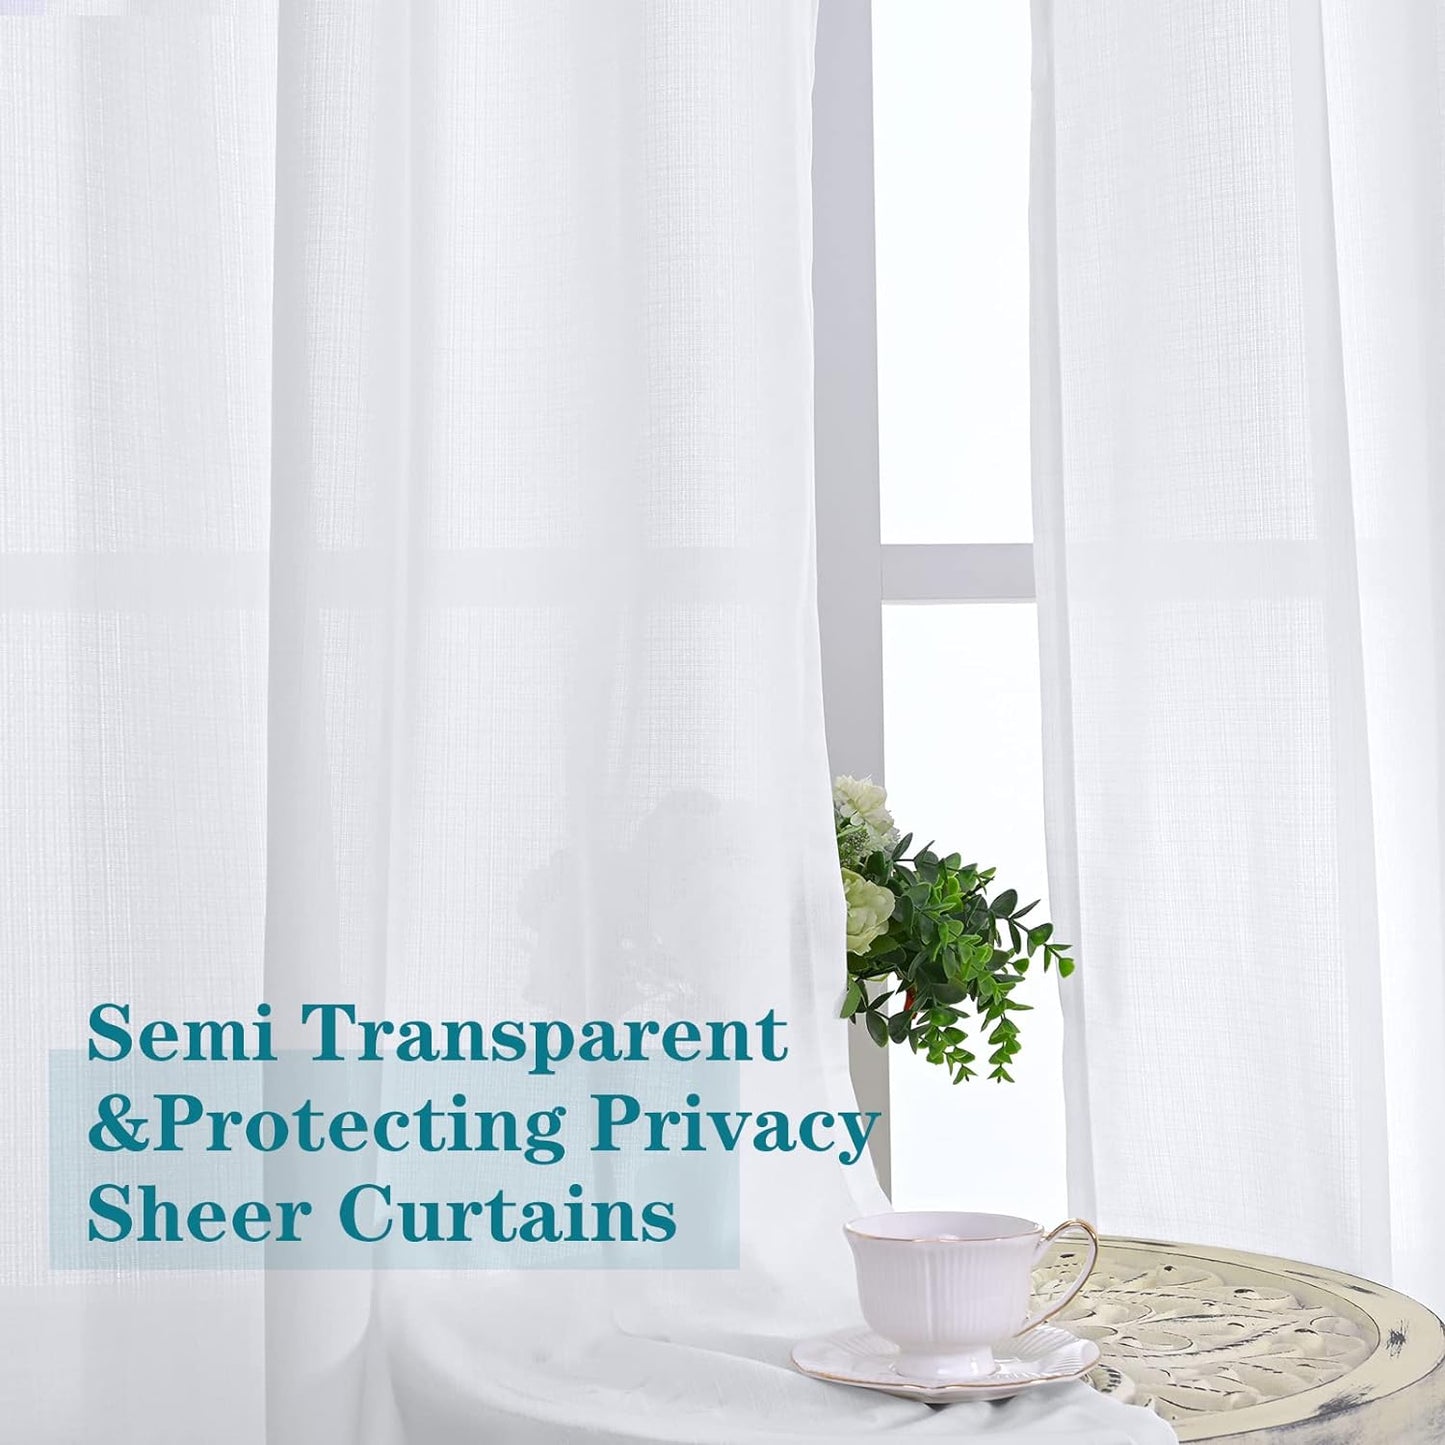 Bgment Natural Linen Look Semi Sheer Curtains for Bedroom, 52 X 54 Inch White Grommet Light Filtering Casual Textured Privacy Curtains for Bay Window, 2 Panels  BGment   